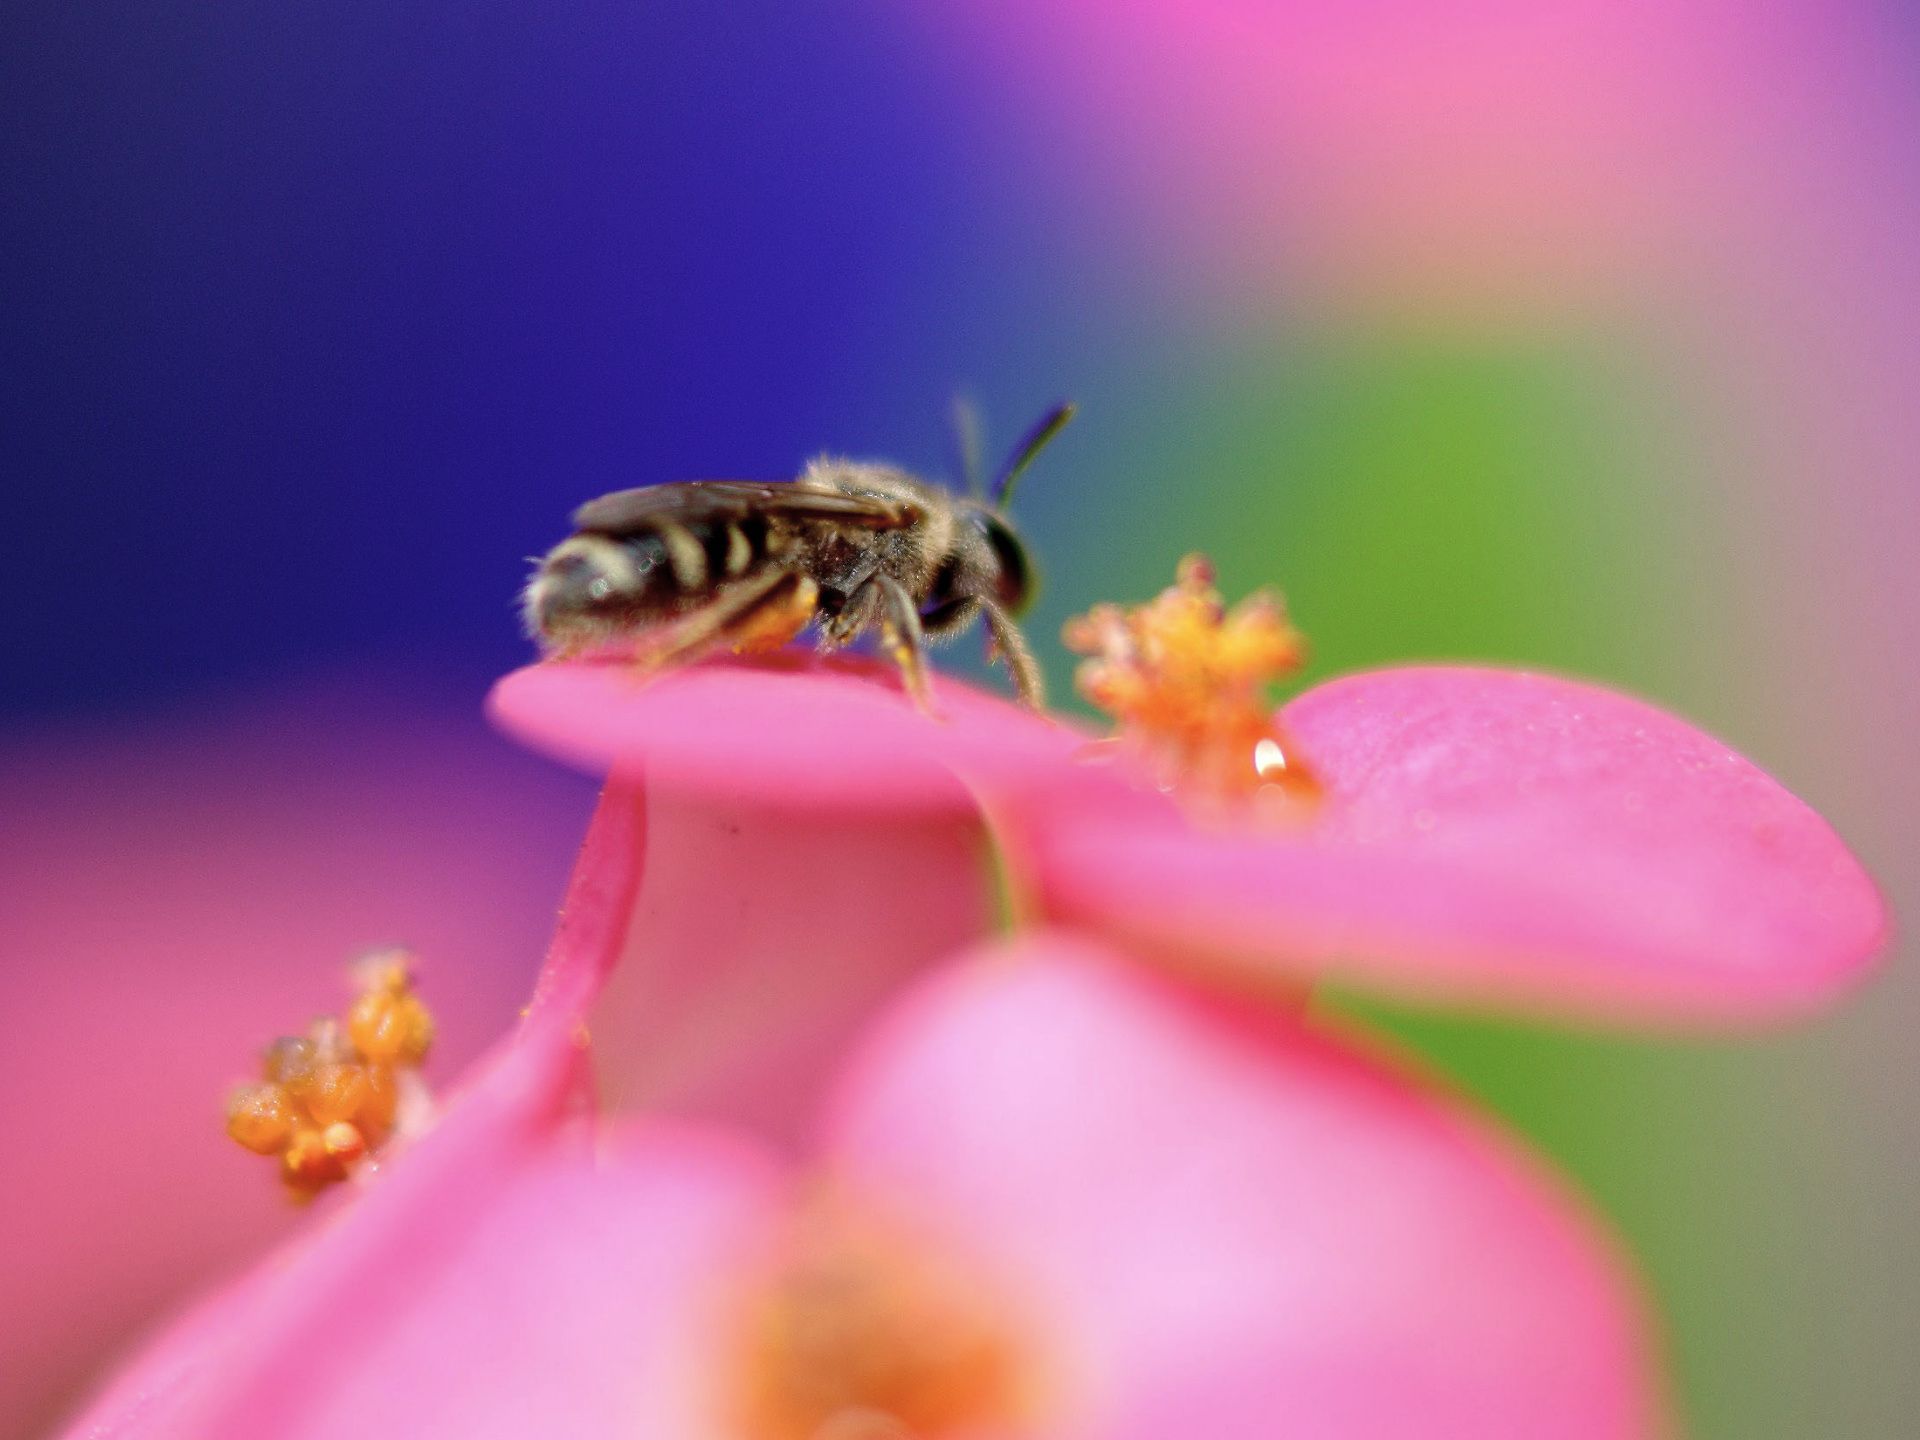 Nature wallpaper - Insects | Wallpaper free hd downloads. Iphone ...